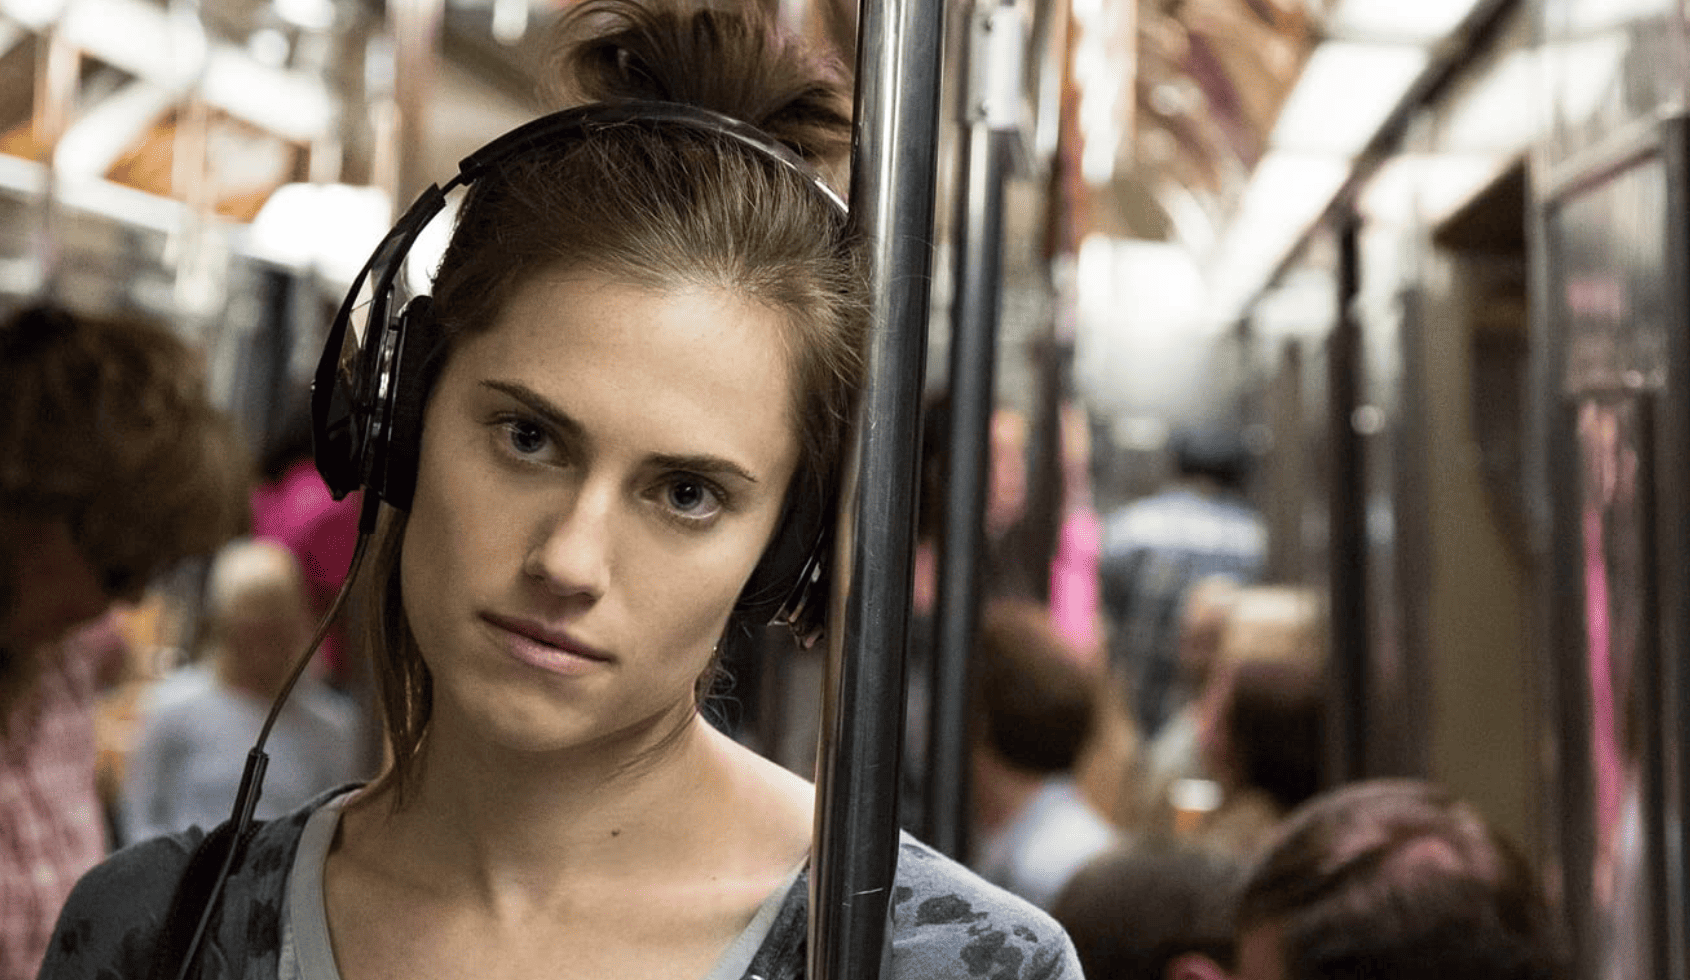 Marnie (Allison Williams) looks defeated while riding the train alone in this image from Apatow Productions